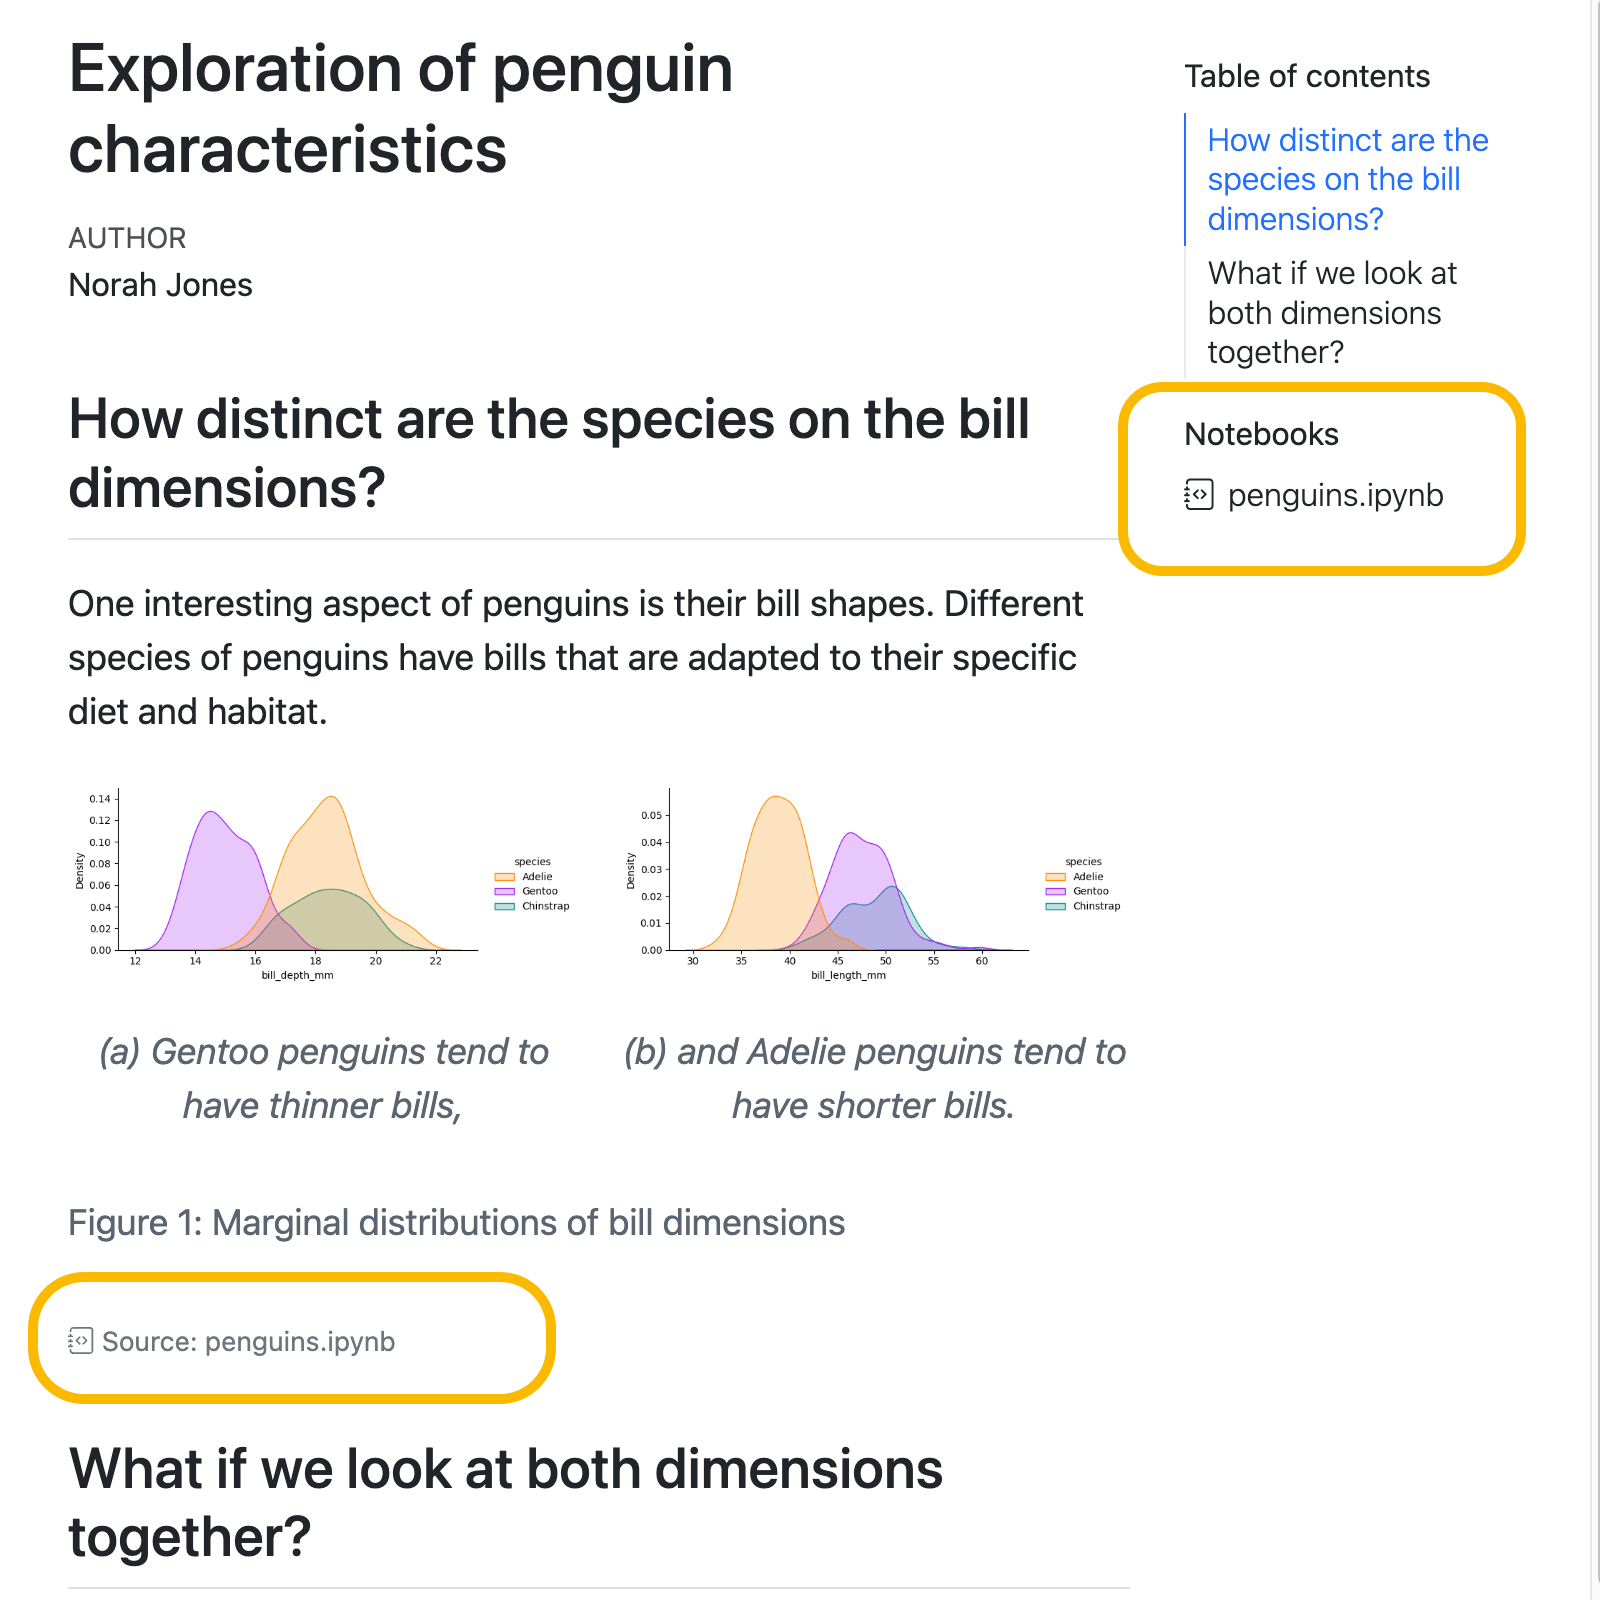 Screenshot of a rendered page with an embedded plot. A link to the Source 'penguins.ipynb' is shown directly below the plot. A similar link is shown below the table of contents under the heading 'Notebooks'.